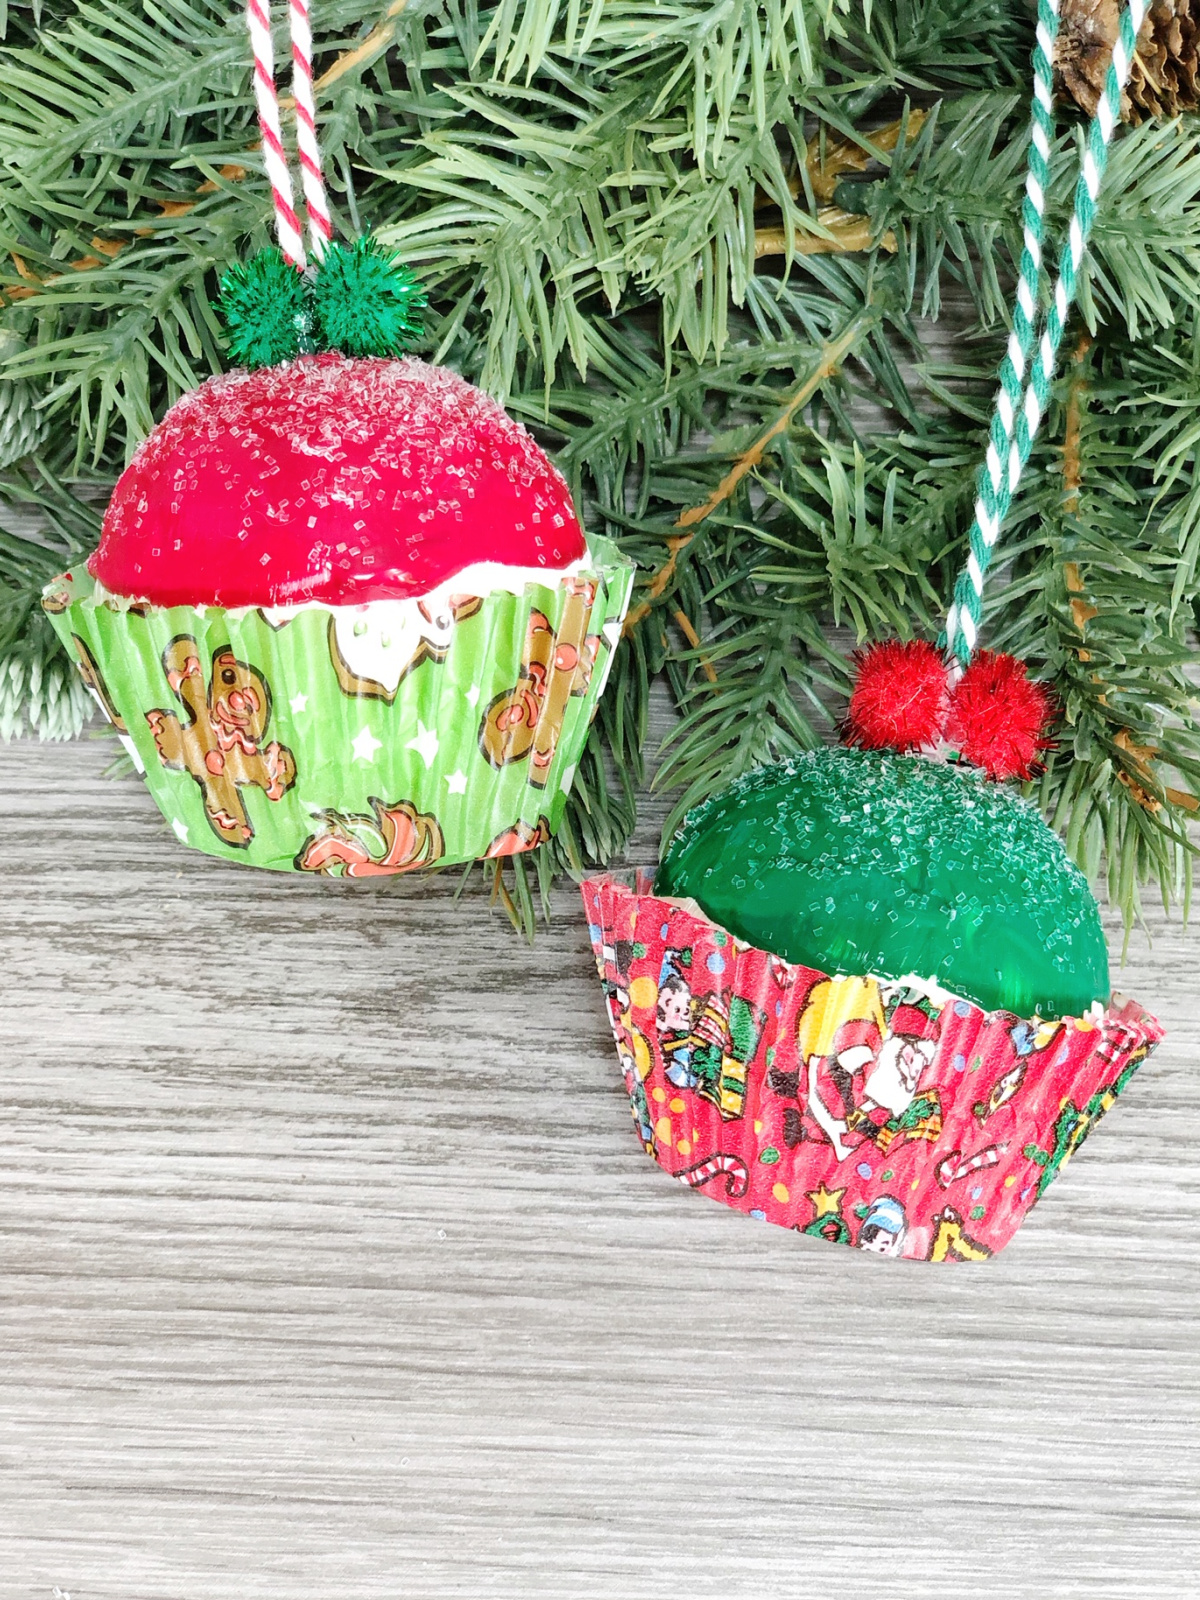 Cupcakes ornaments with a Christmas tree branch behind them